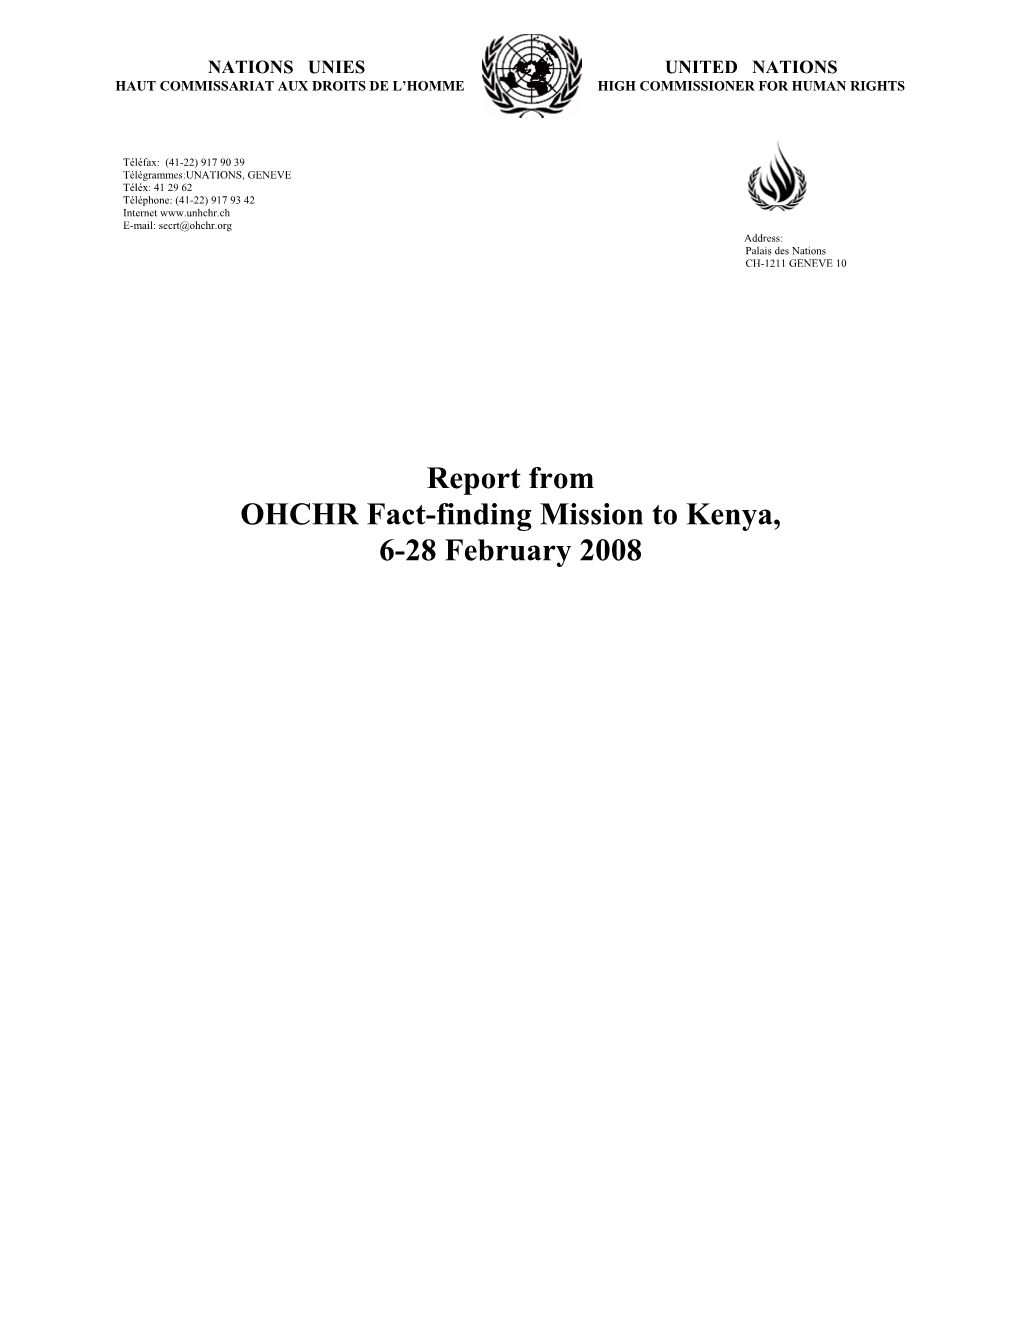 Report from OHCHR Fact-Finding Mission to Kenya, 6-28 February 2008